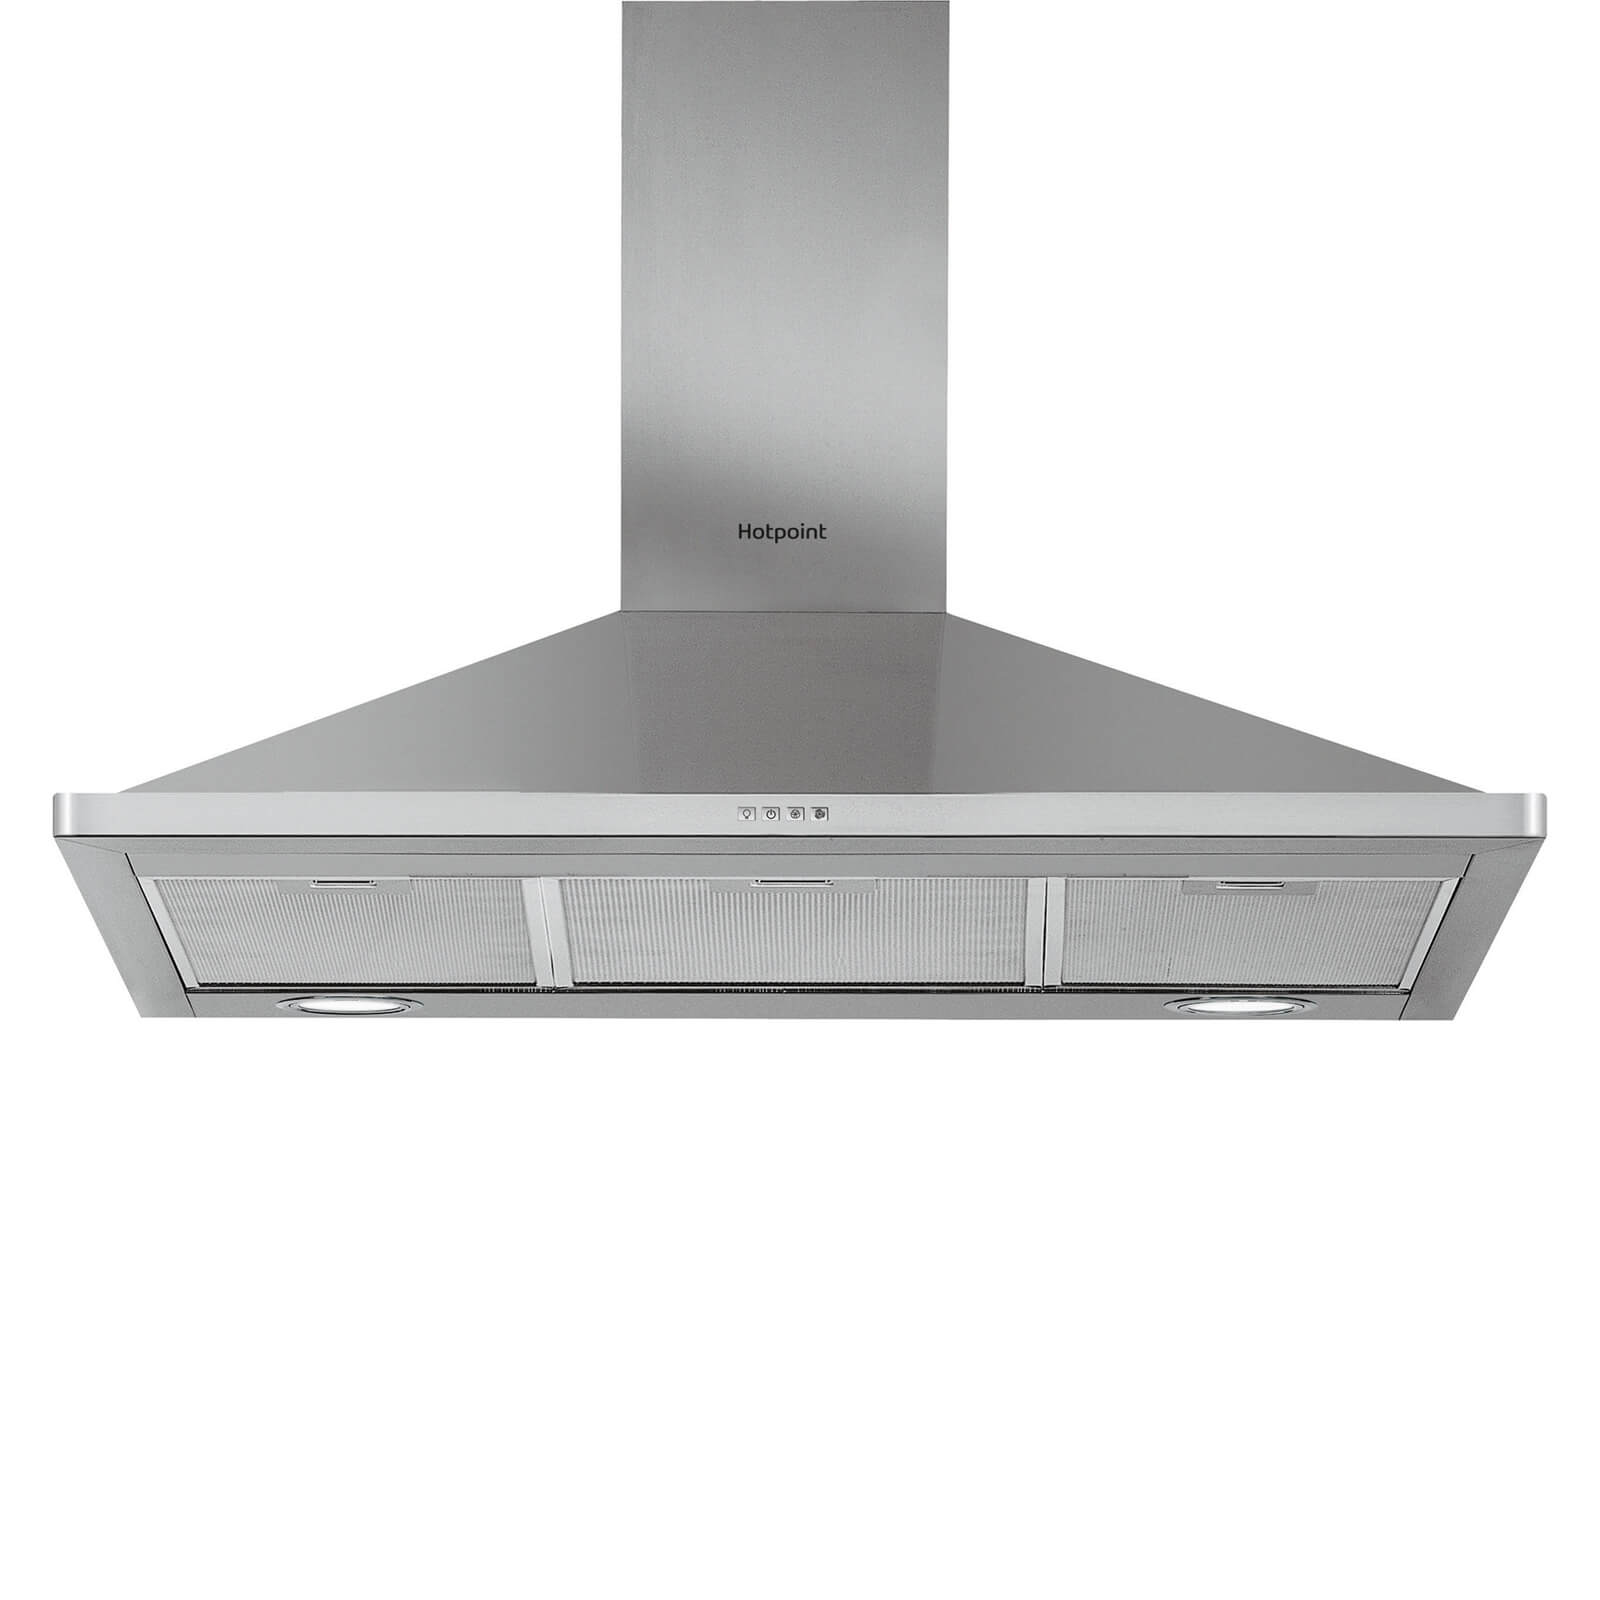 Hotpoint Newstyle PHPN6.4FAMX Chimney Cooker Hood - 90cm - Stainless Steel